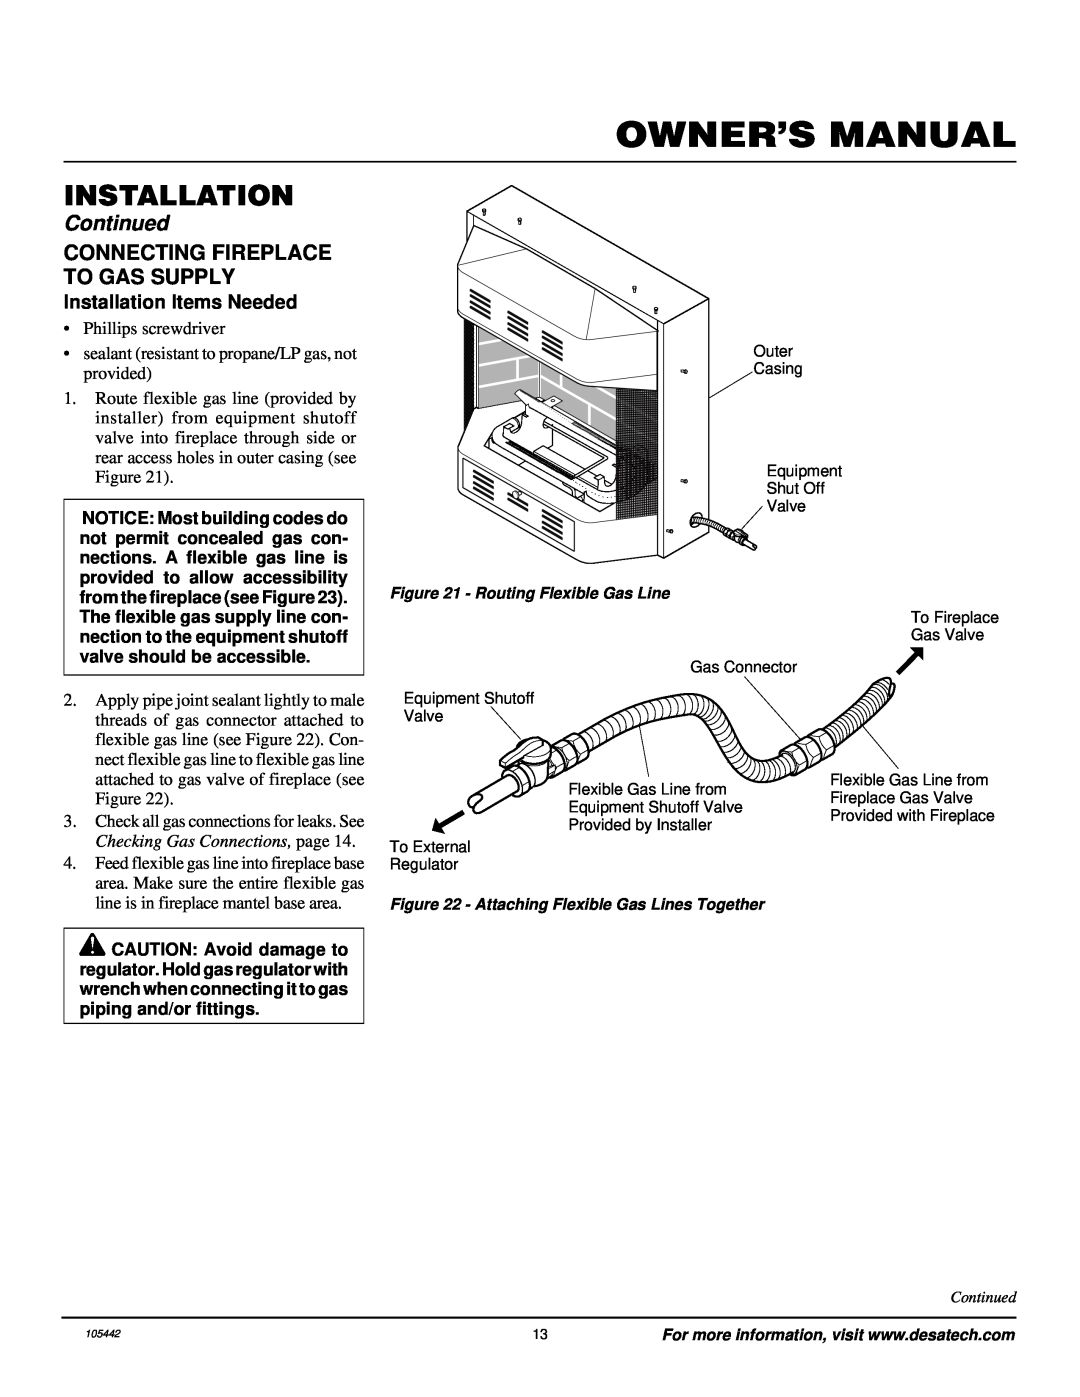 Desa CF26PR installation manual Connecting Fireplace To Gas Supply, Installation, Continued, Checking Gas Connections, page 